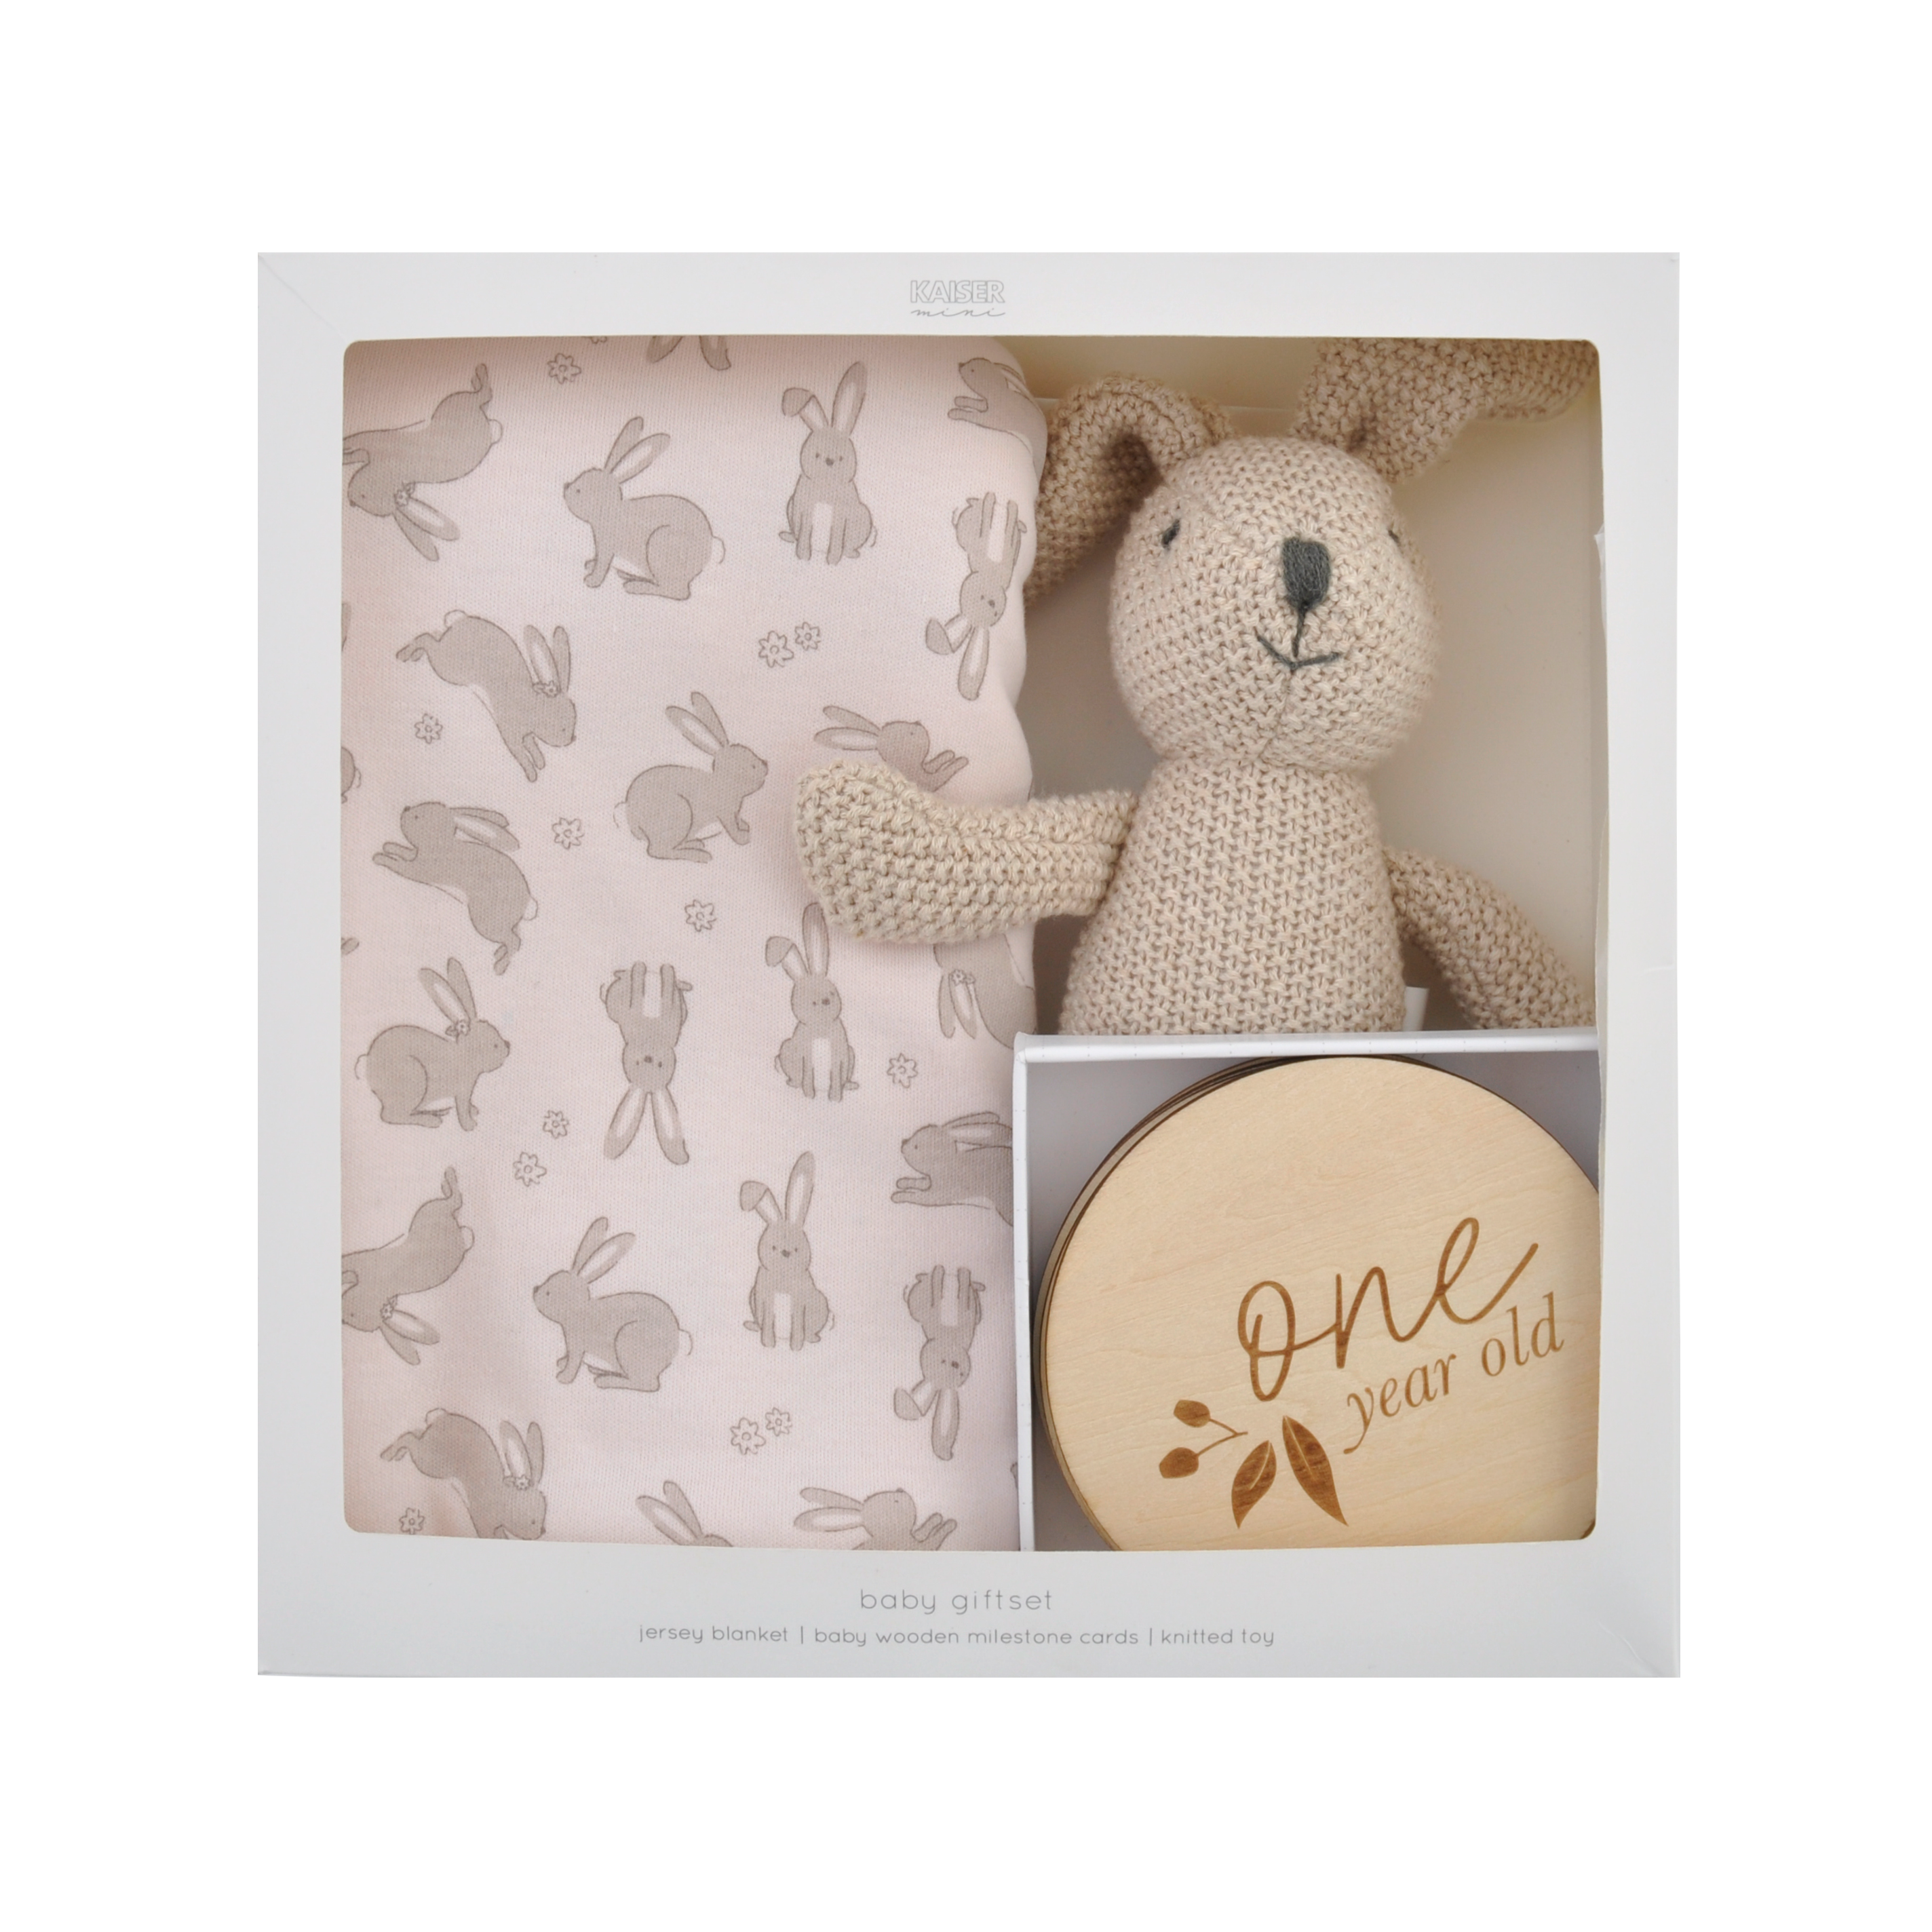 Baby Jersey Blanket, Wood M/Stone Card & Toy Gift Set - Playful Bunnies